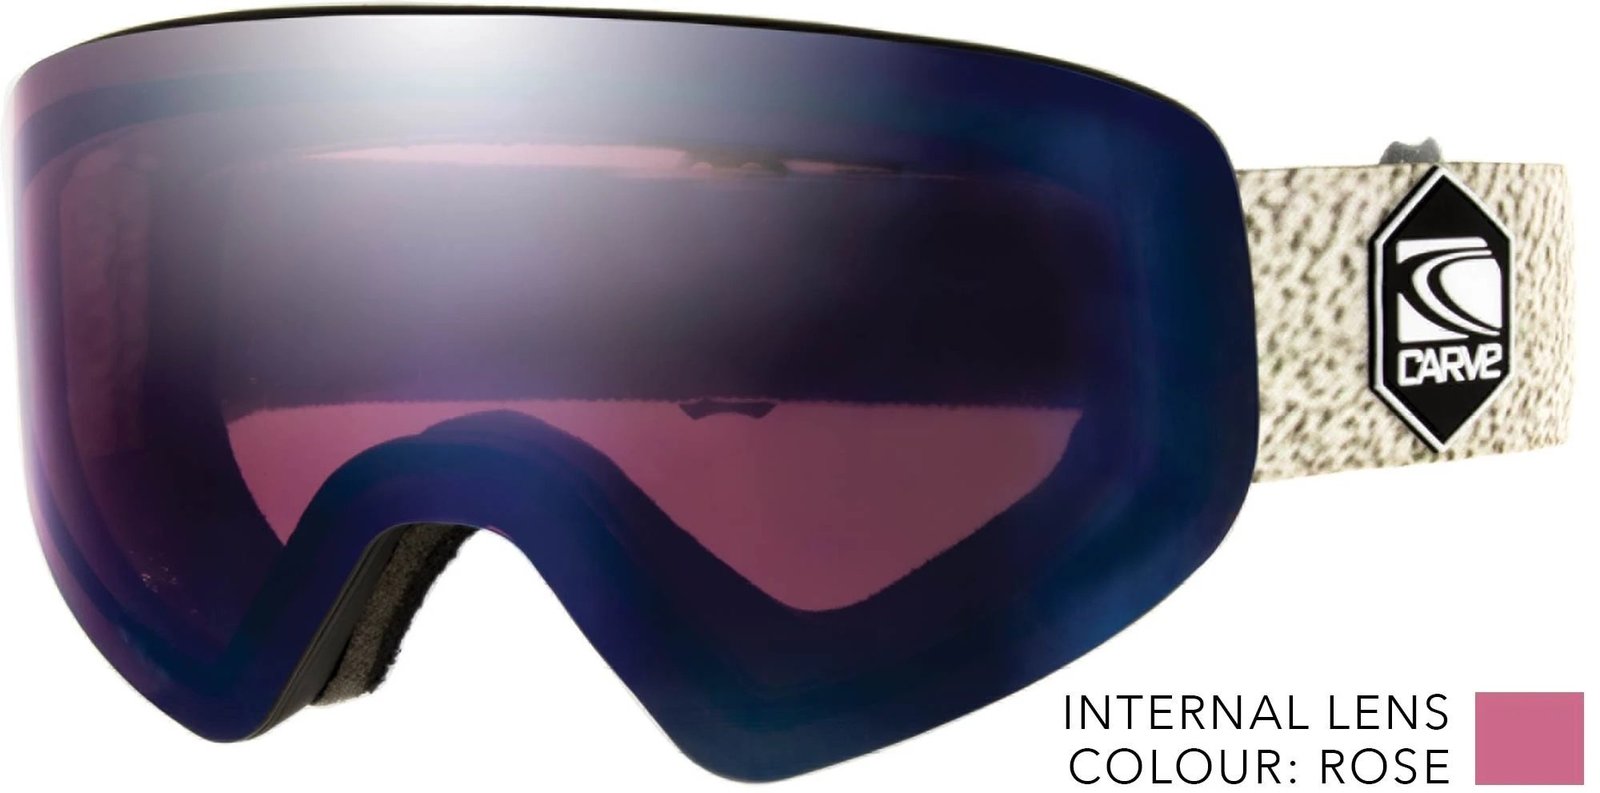 Primary image for Carve INFINITY snow goggle